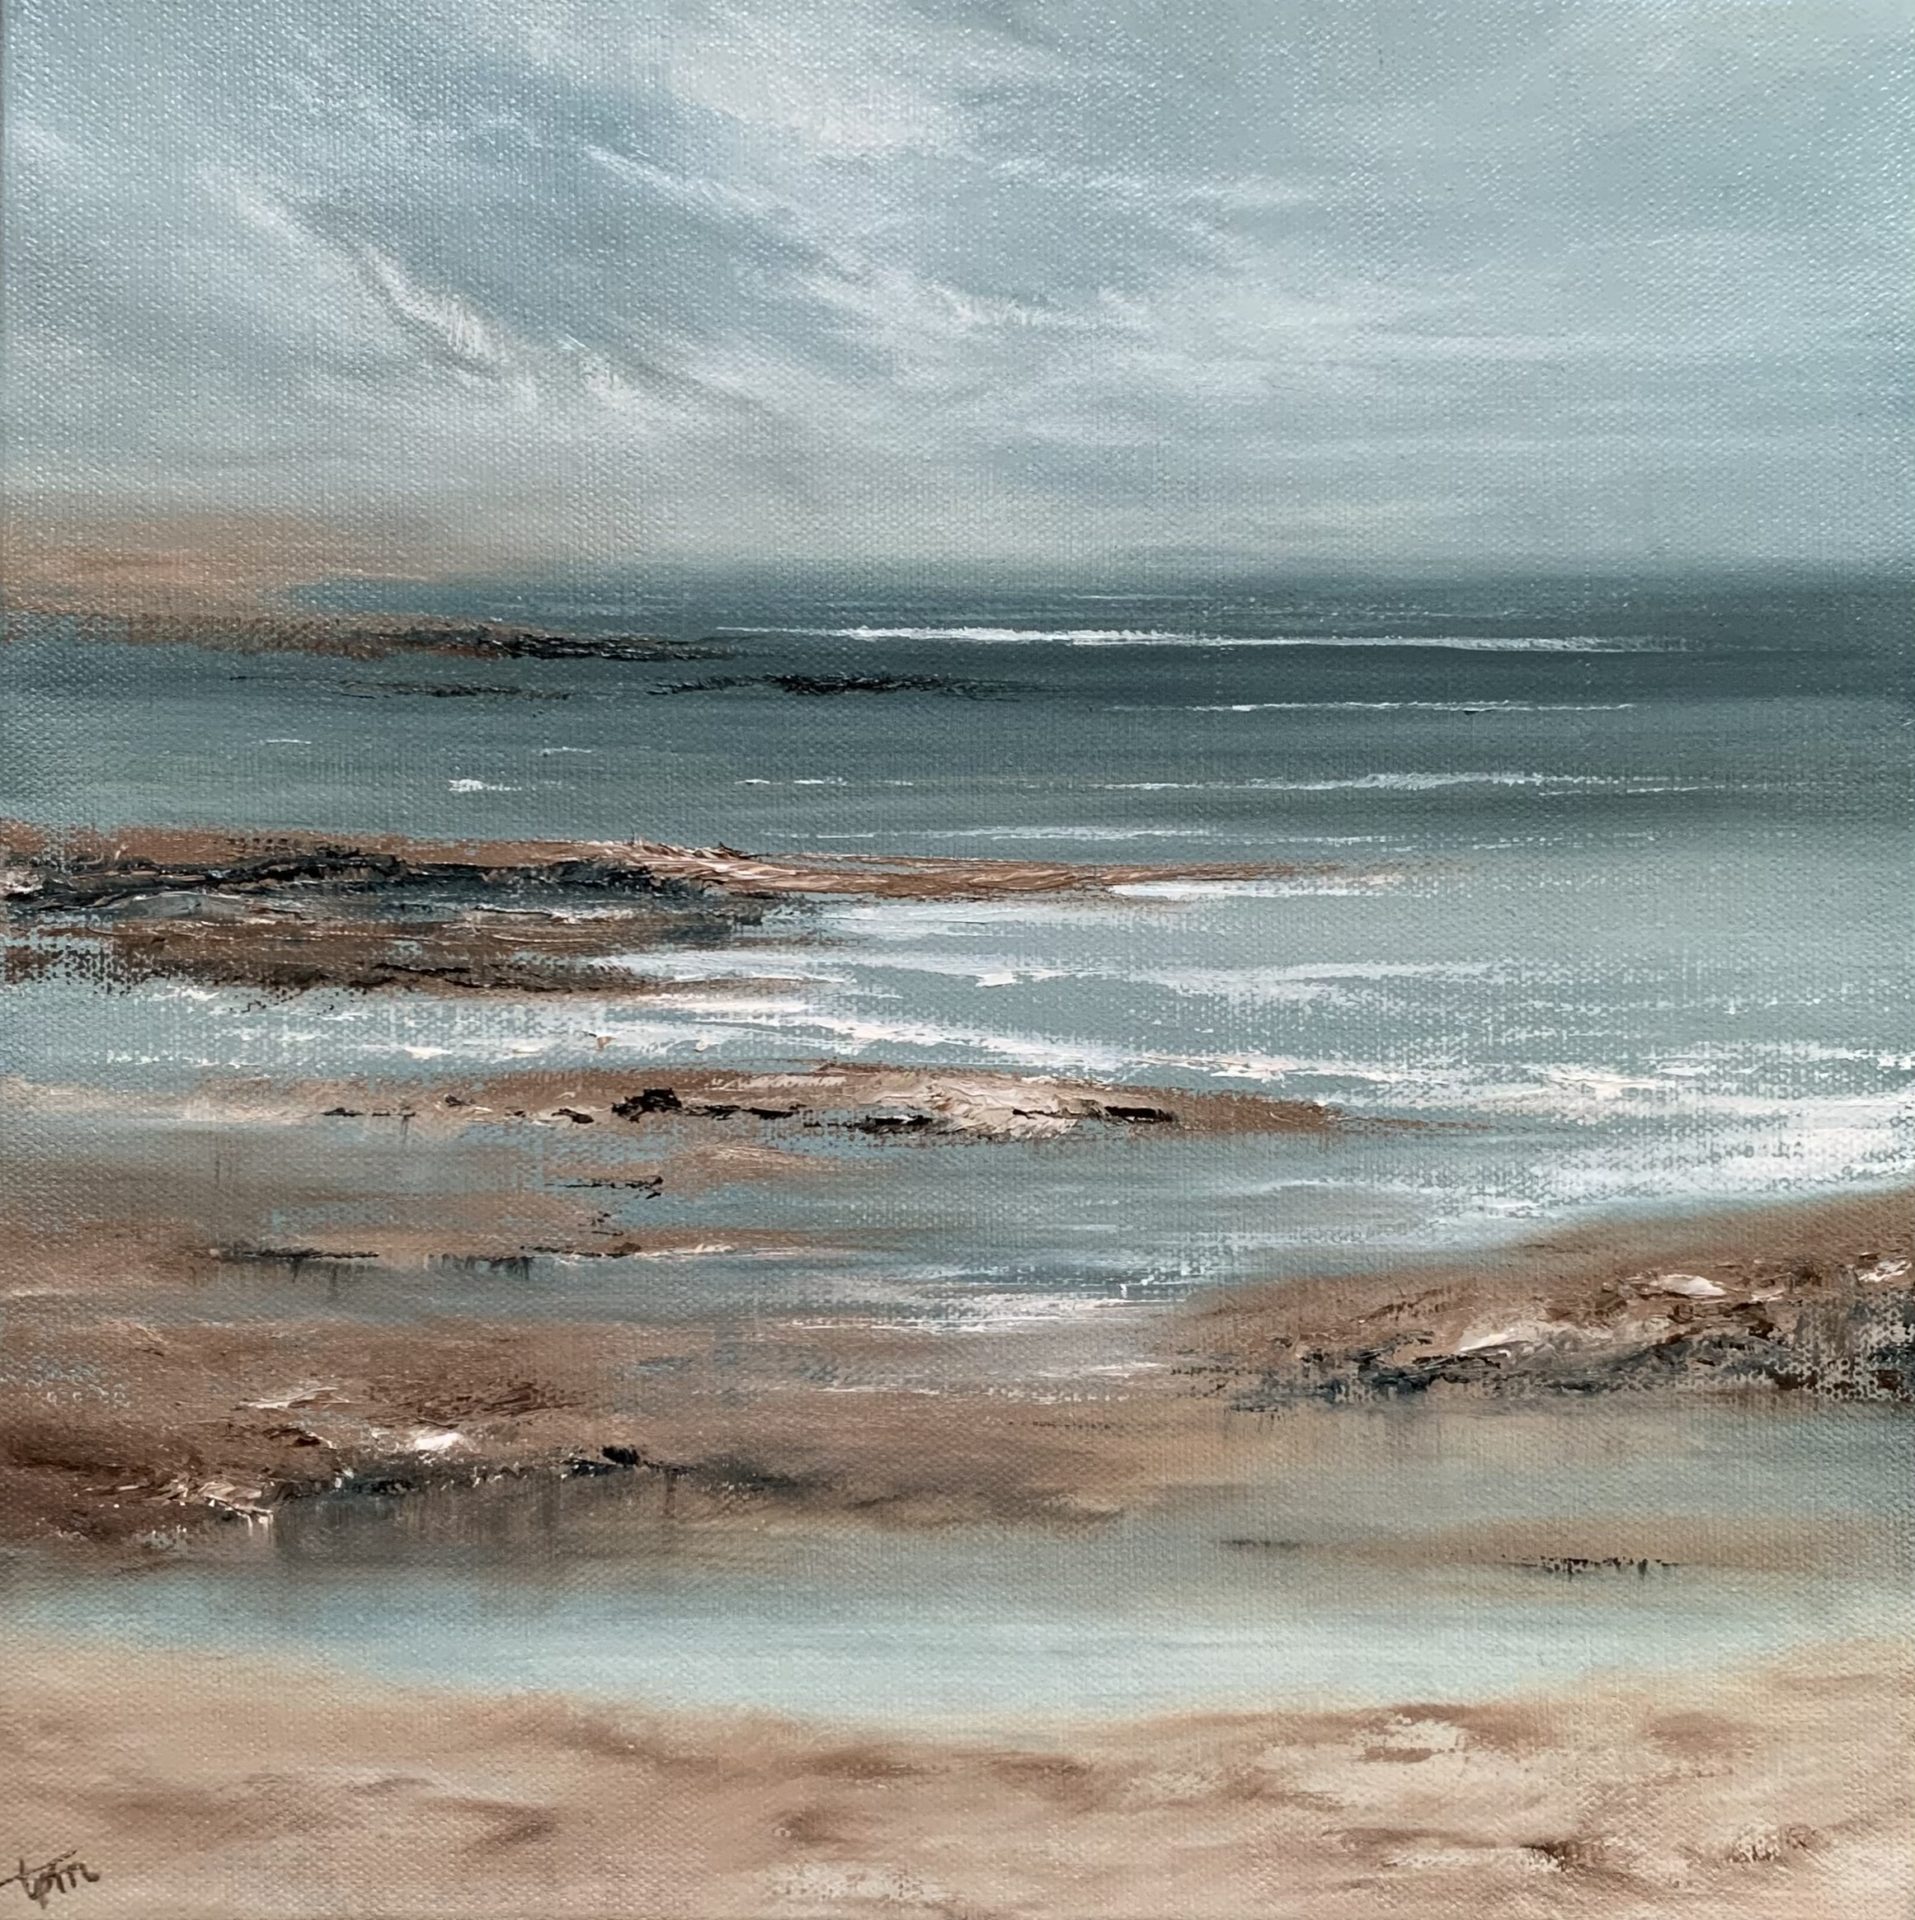 Photo of original seascape oil painting by Tisha Mark, "Tide Pools IV" 12"x12 oil on canvas (2022). Seascape painting in cool blues and grays with contrasting warm tones of brown featuring textures found in tide pools during a wintertime visit to a beach.